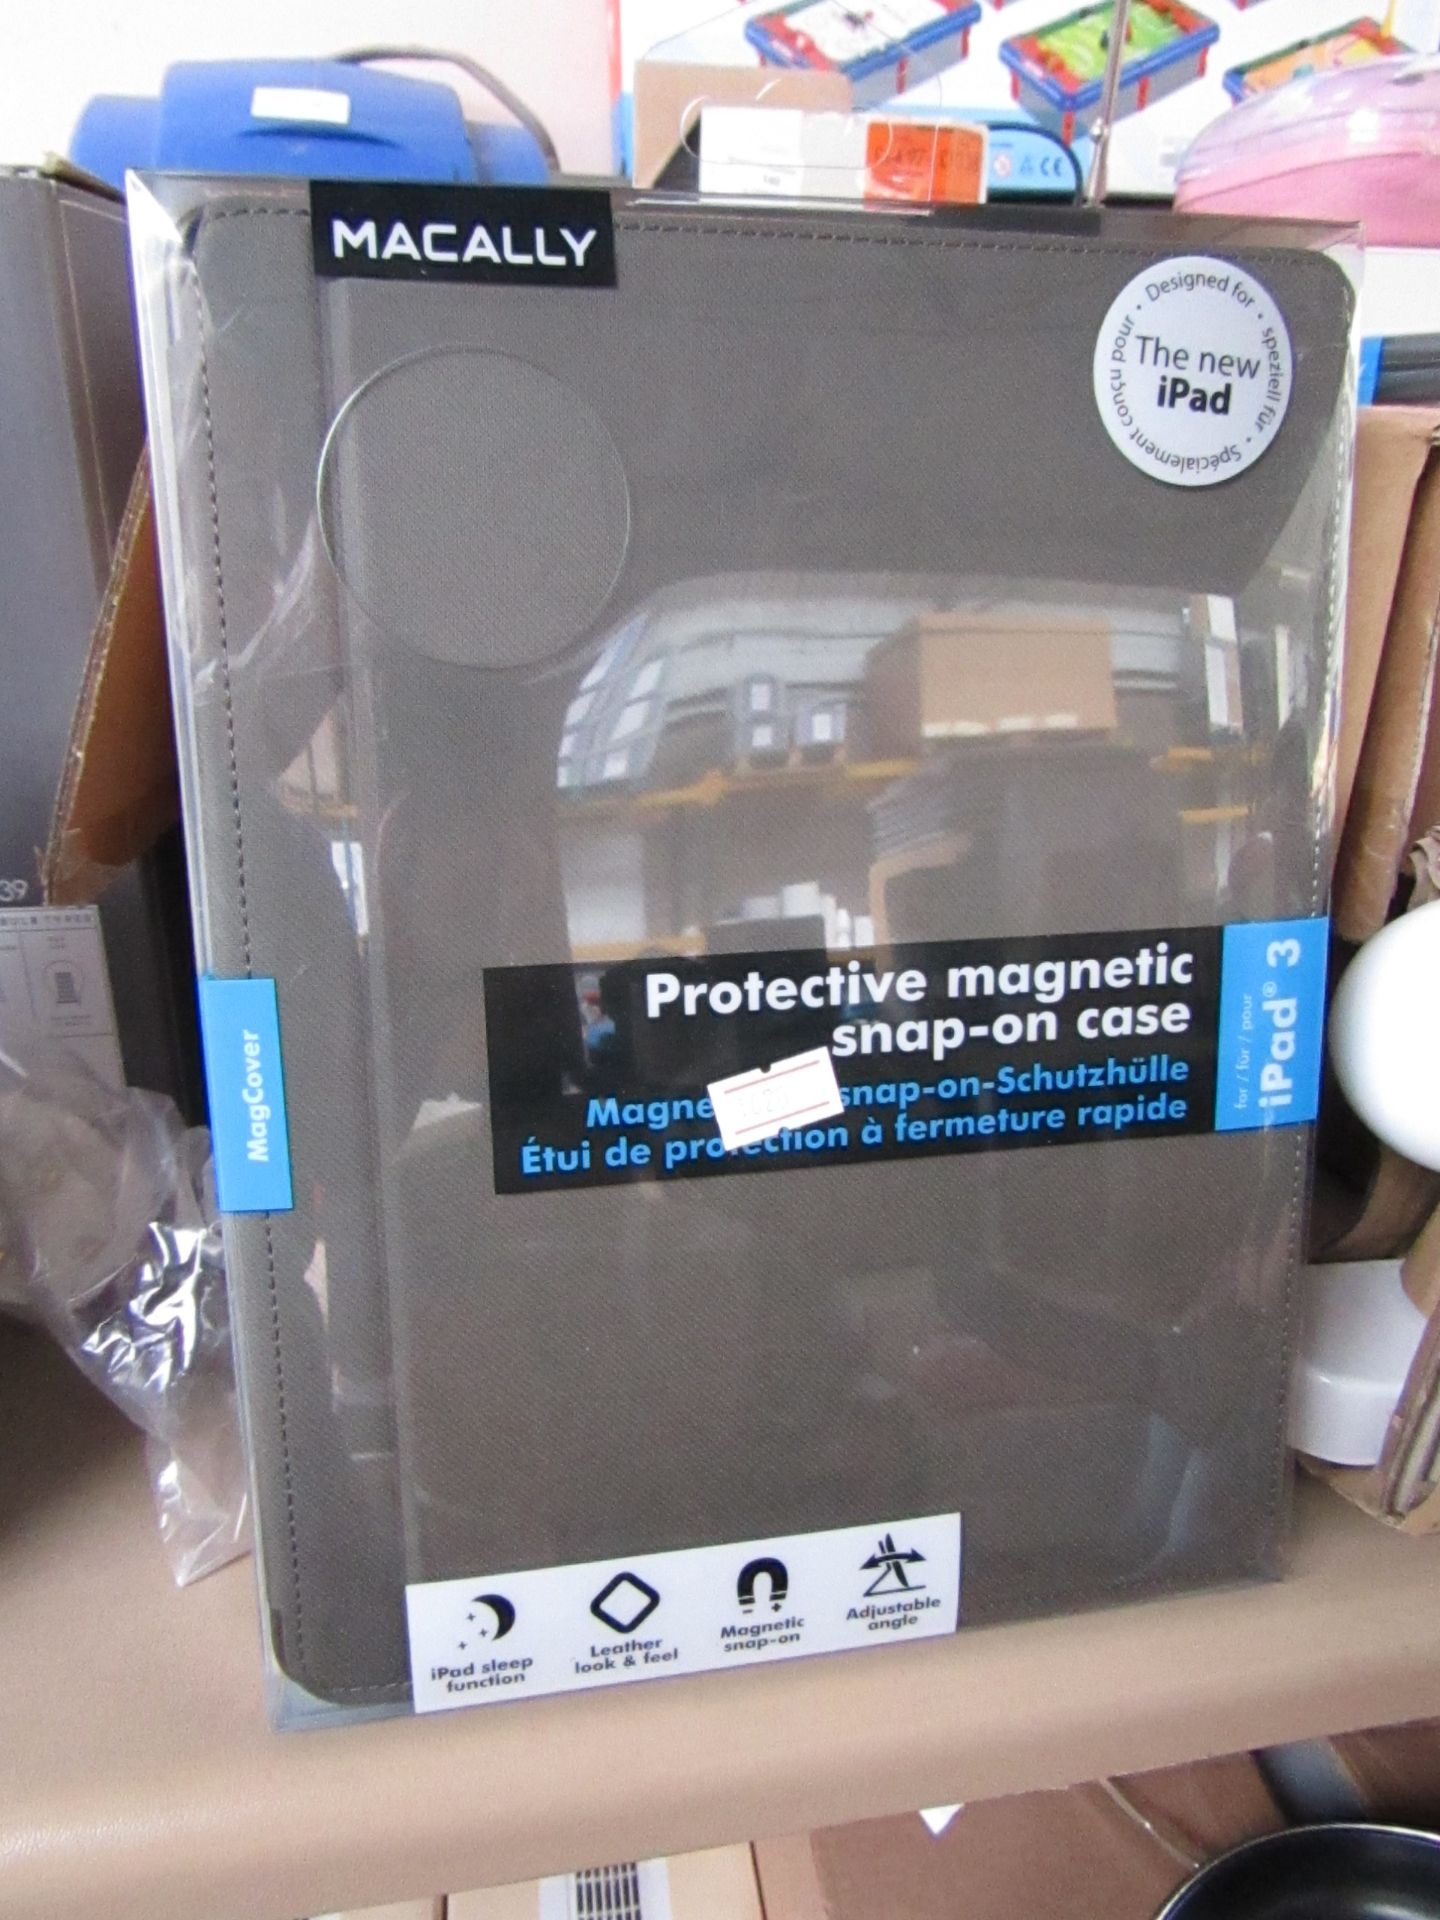 5x Protective magnetic snap on cases, iPad 3, all new and packaged.